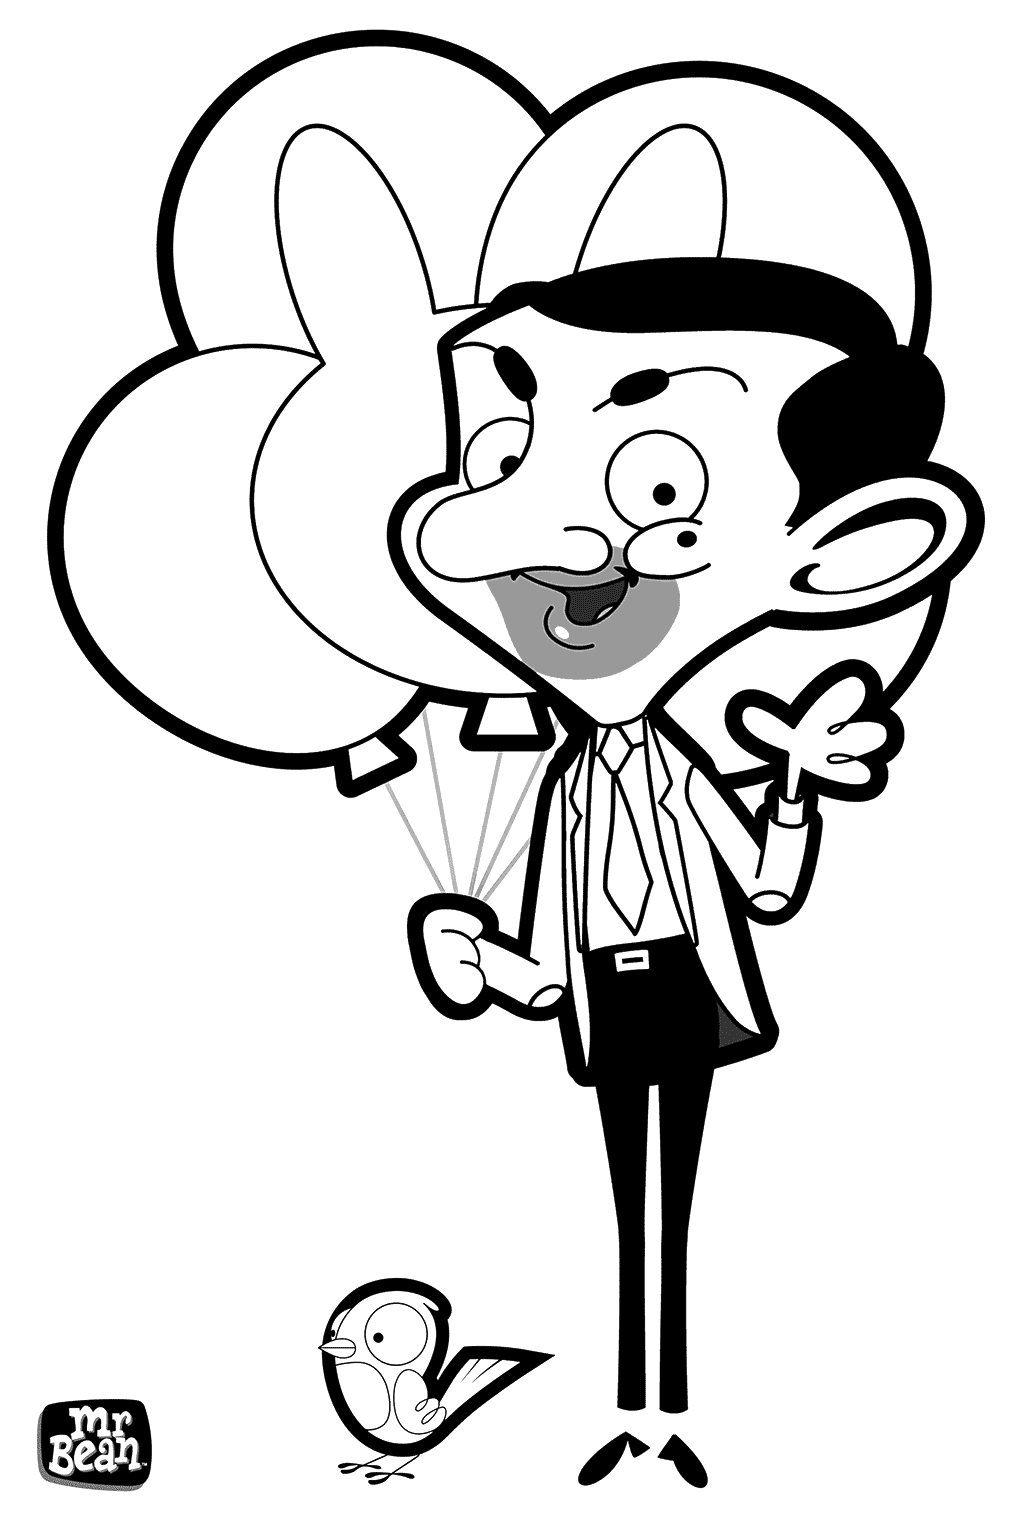 Mr Bean With Balloons Coloring Pages - Mr. Bean Coloring Pages - Coloring  Pages For Kids And Adults